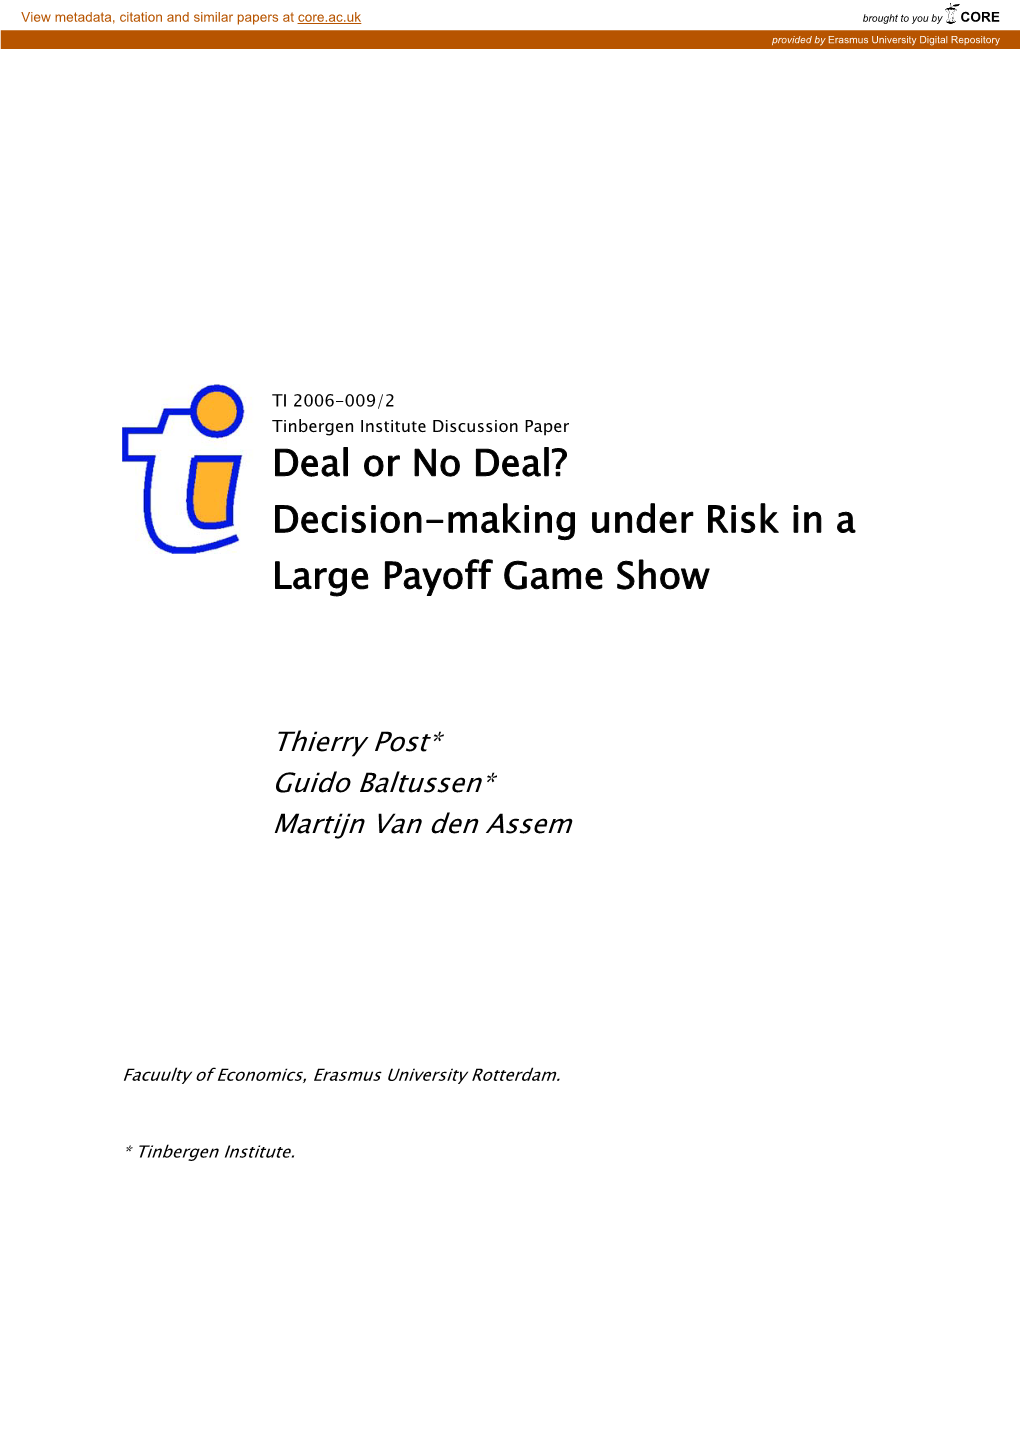 Deal Or No Deal? Decision-Making Under Risk in A